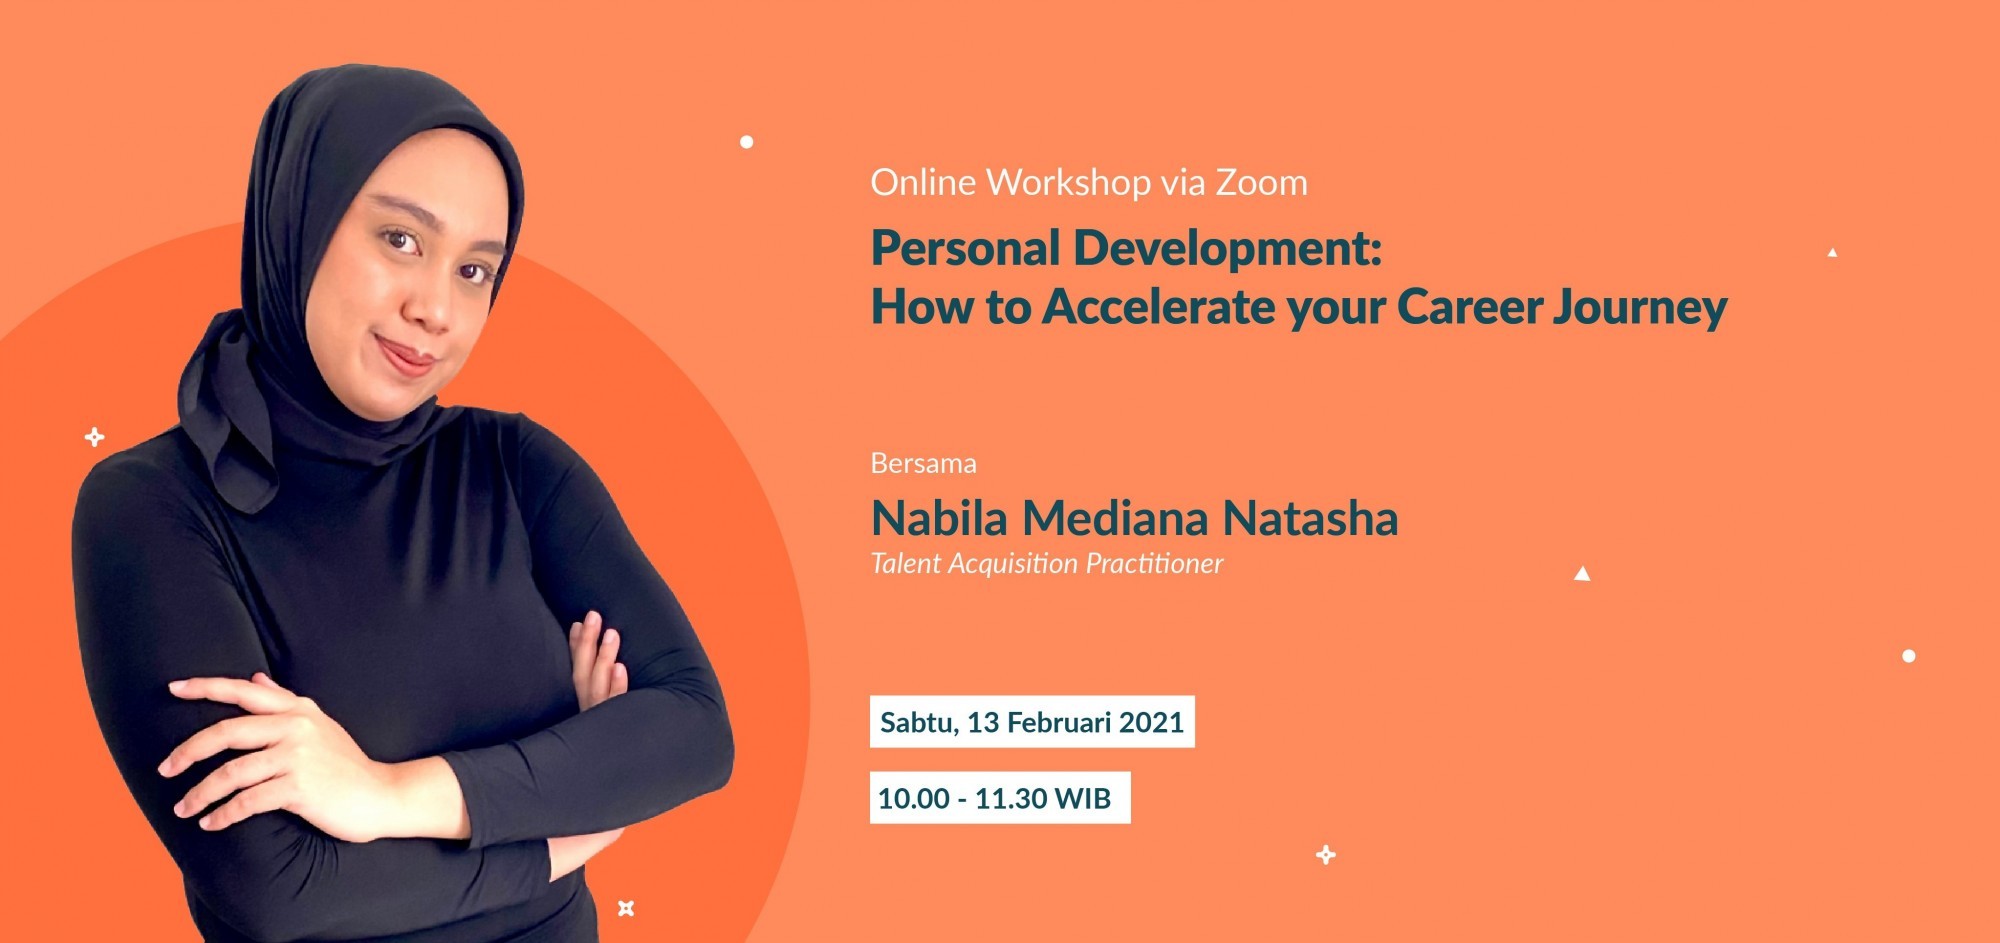 Personal Development: How to Accelerate Your Career Journey